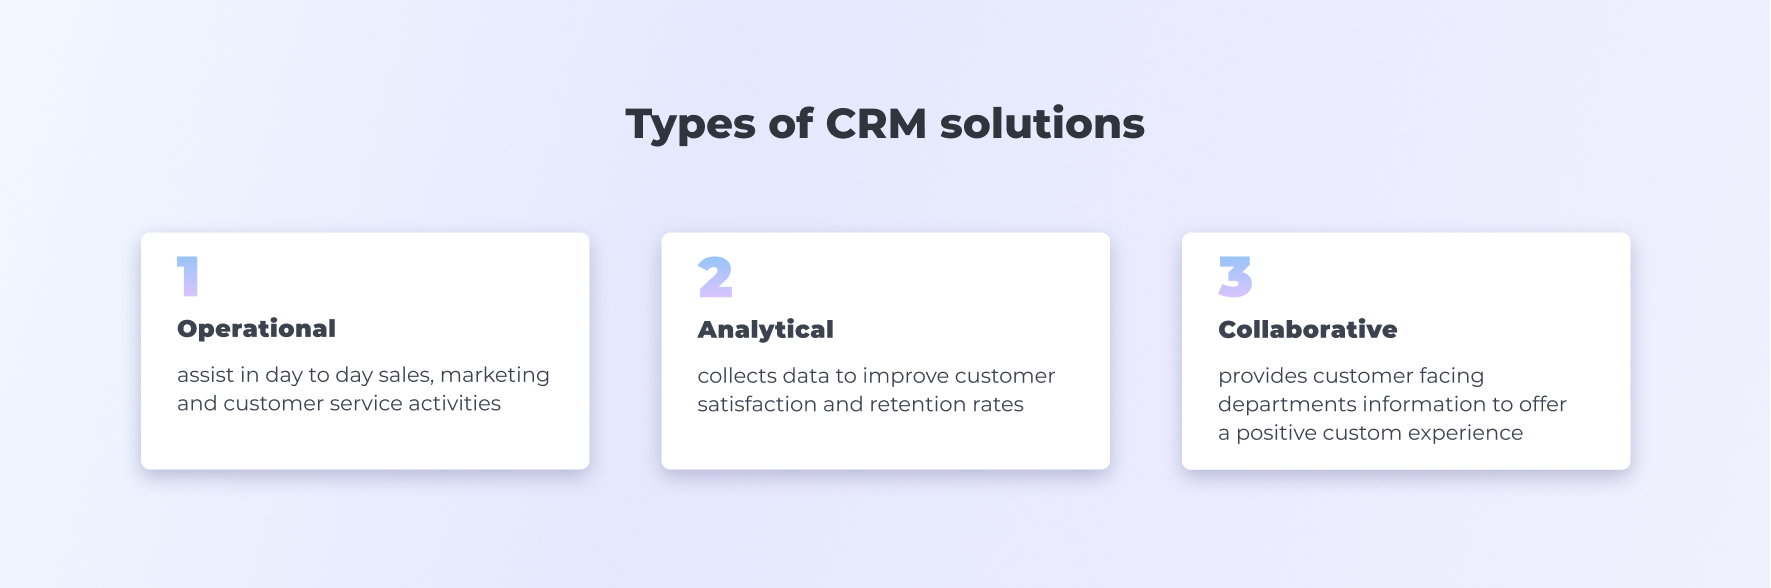 types-of-crm-solutions